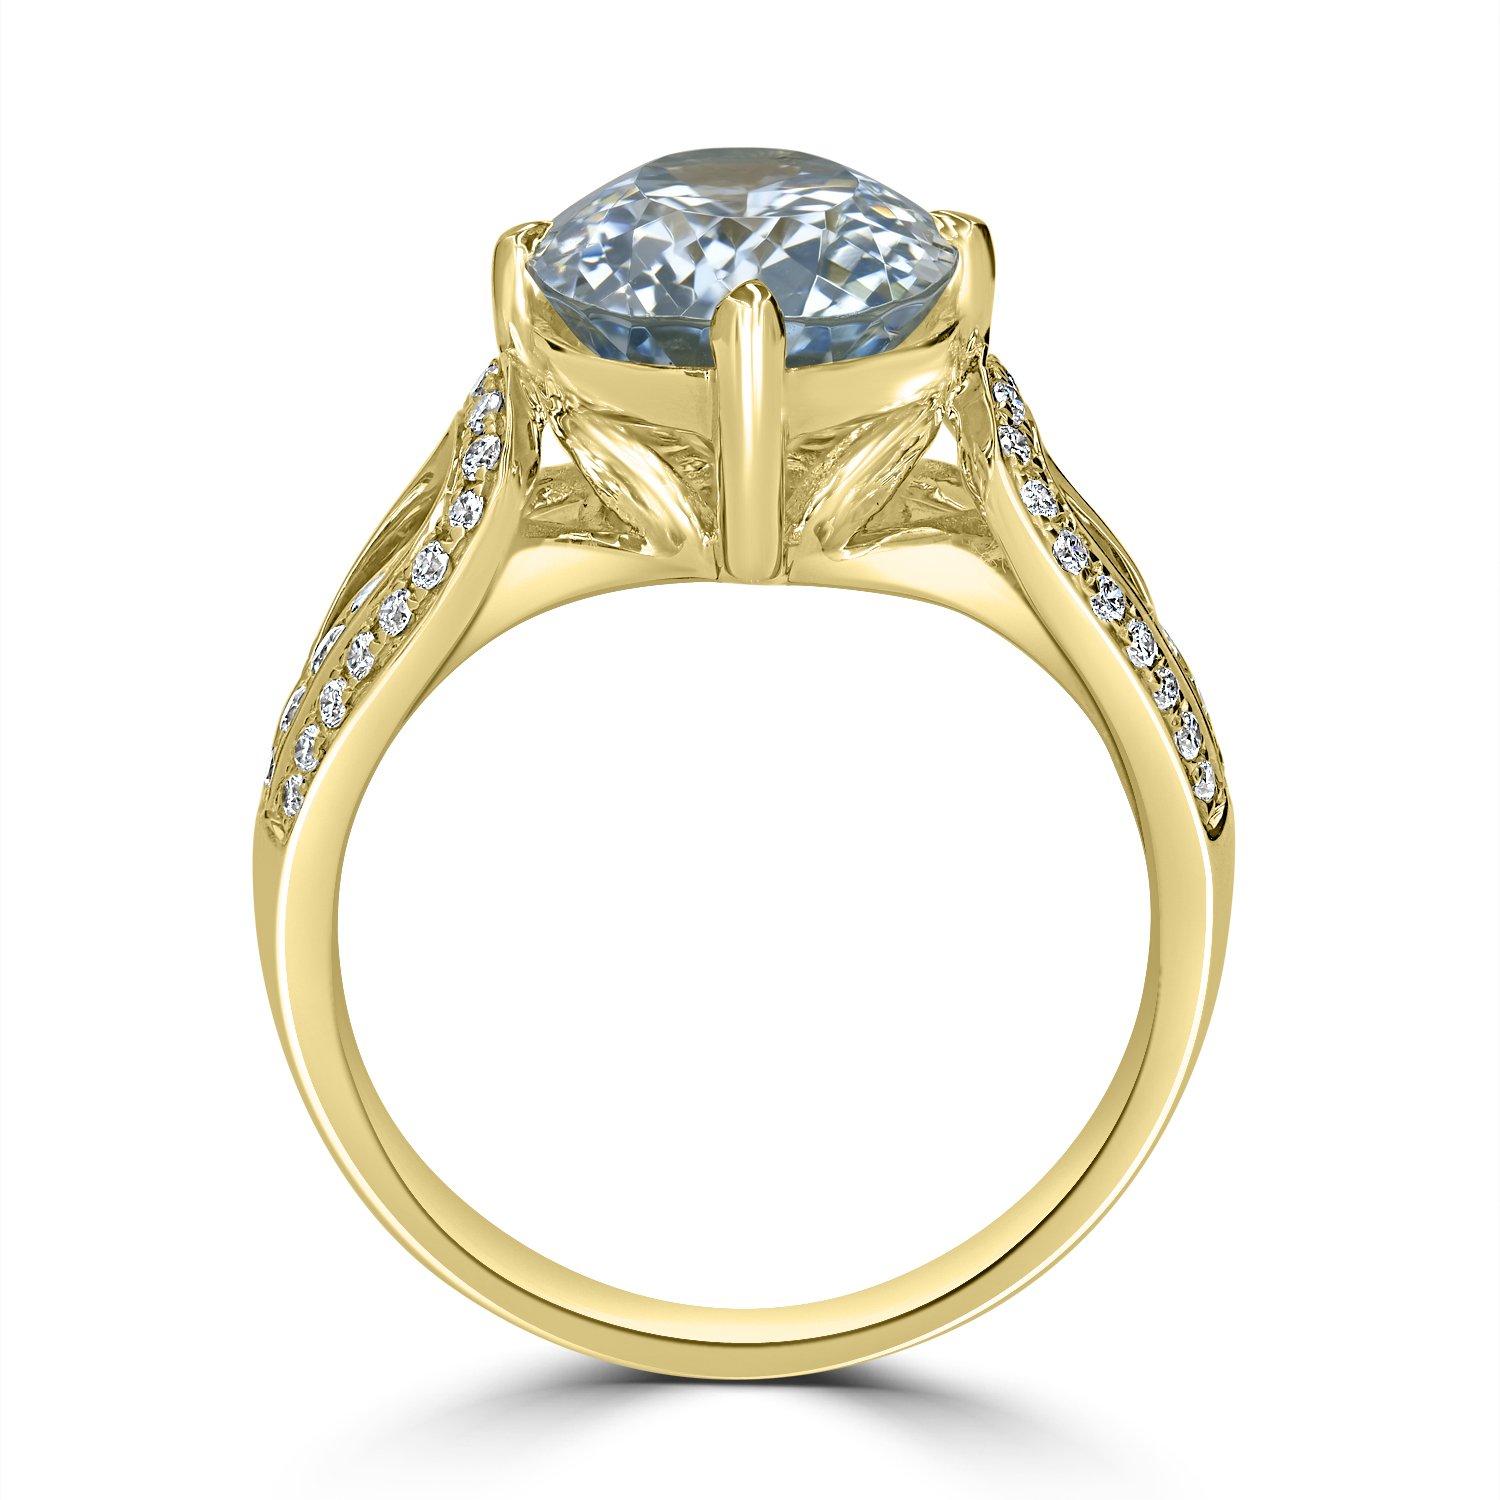 4.02ct Aquamarine Ring with 0.3Tct Diamonds Set in 14K Yellow Gold For Sale 1